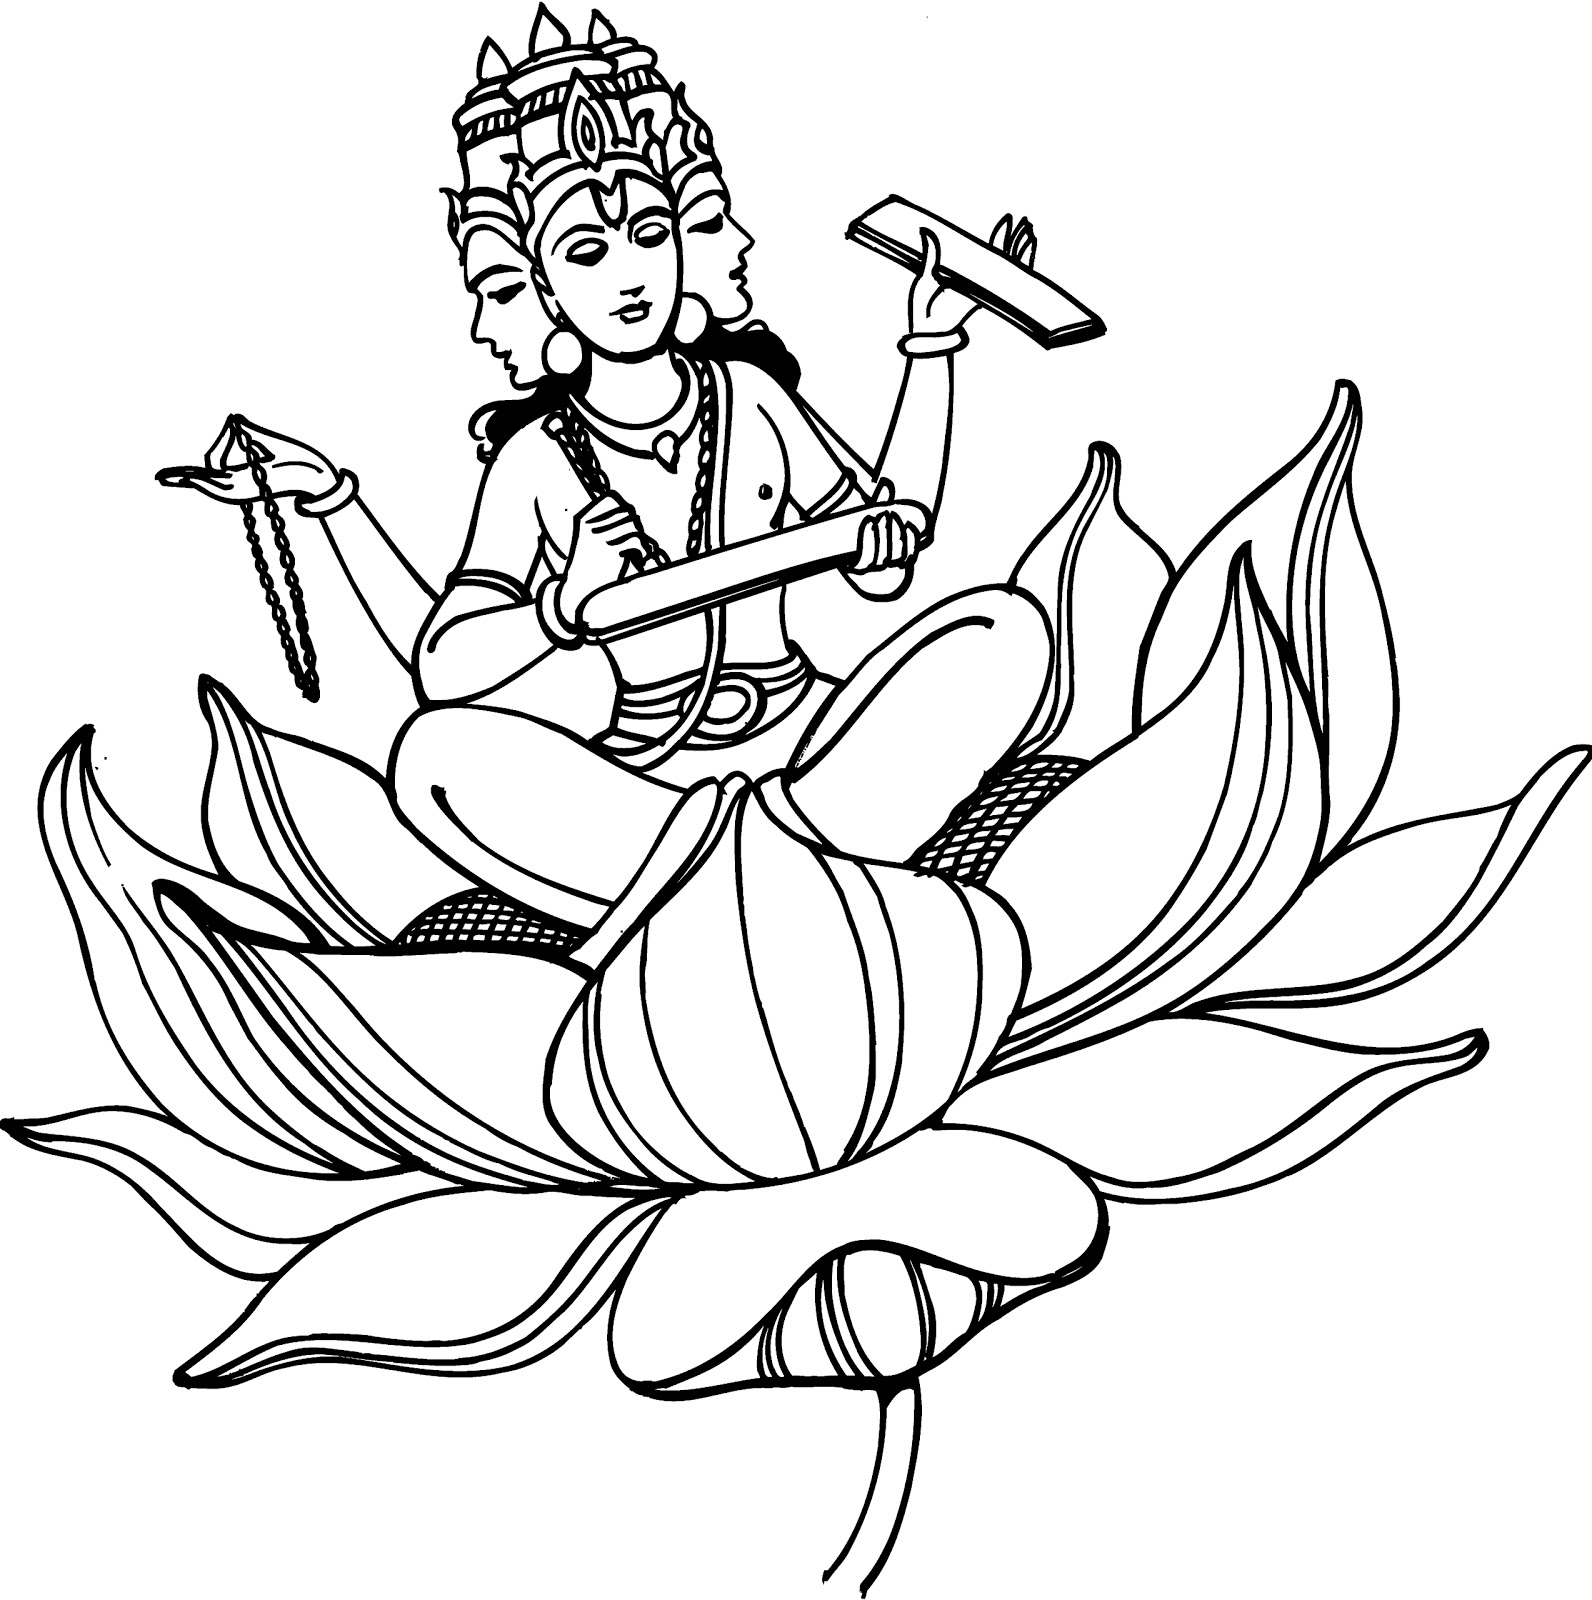 Coloring page: Hindu Mythology (Gods and Goddesses) #109234 - Printable coloring pages